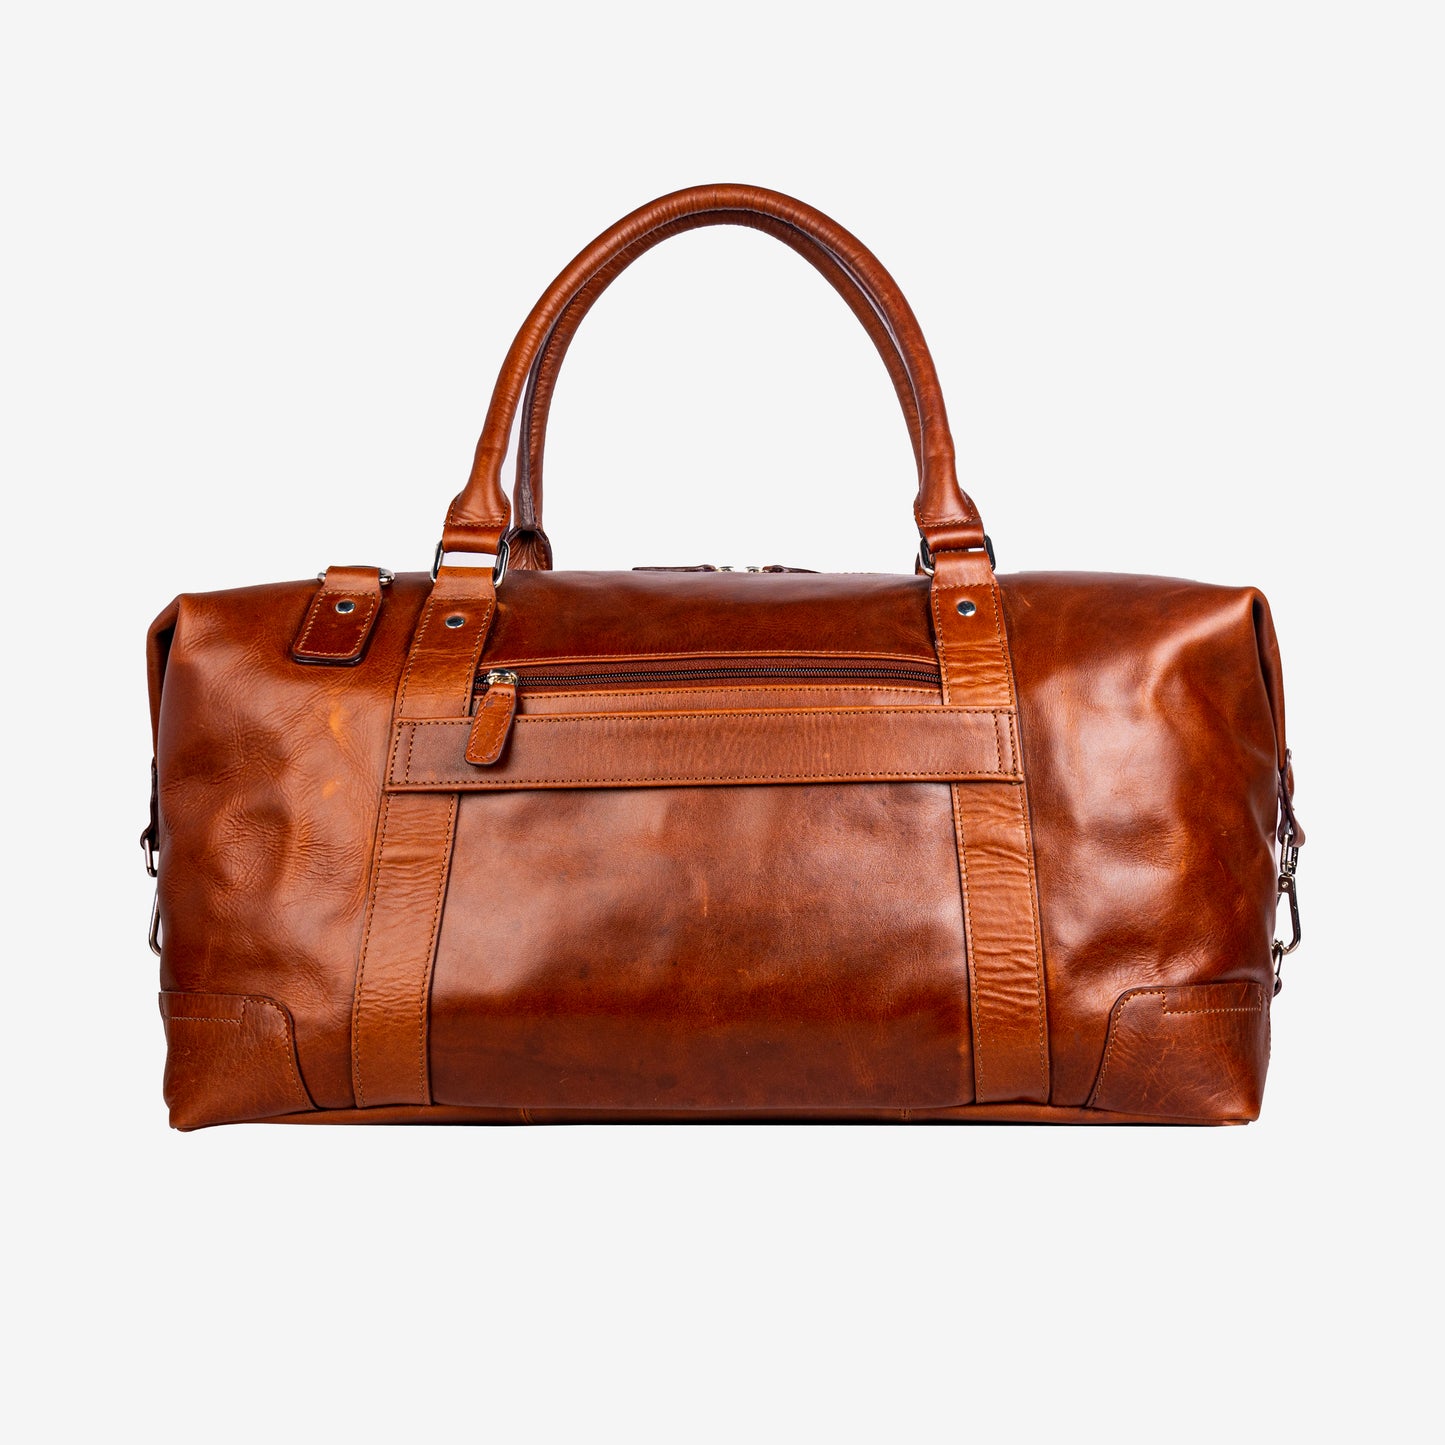 GT-023: G&T Leather Large Holdall, Duffel Bag, Weekender Bag, Luggage Bag by G&T